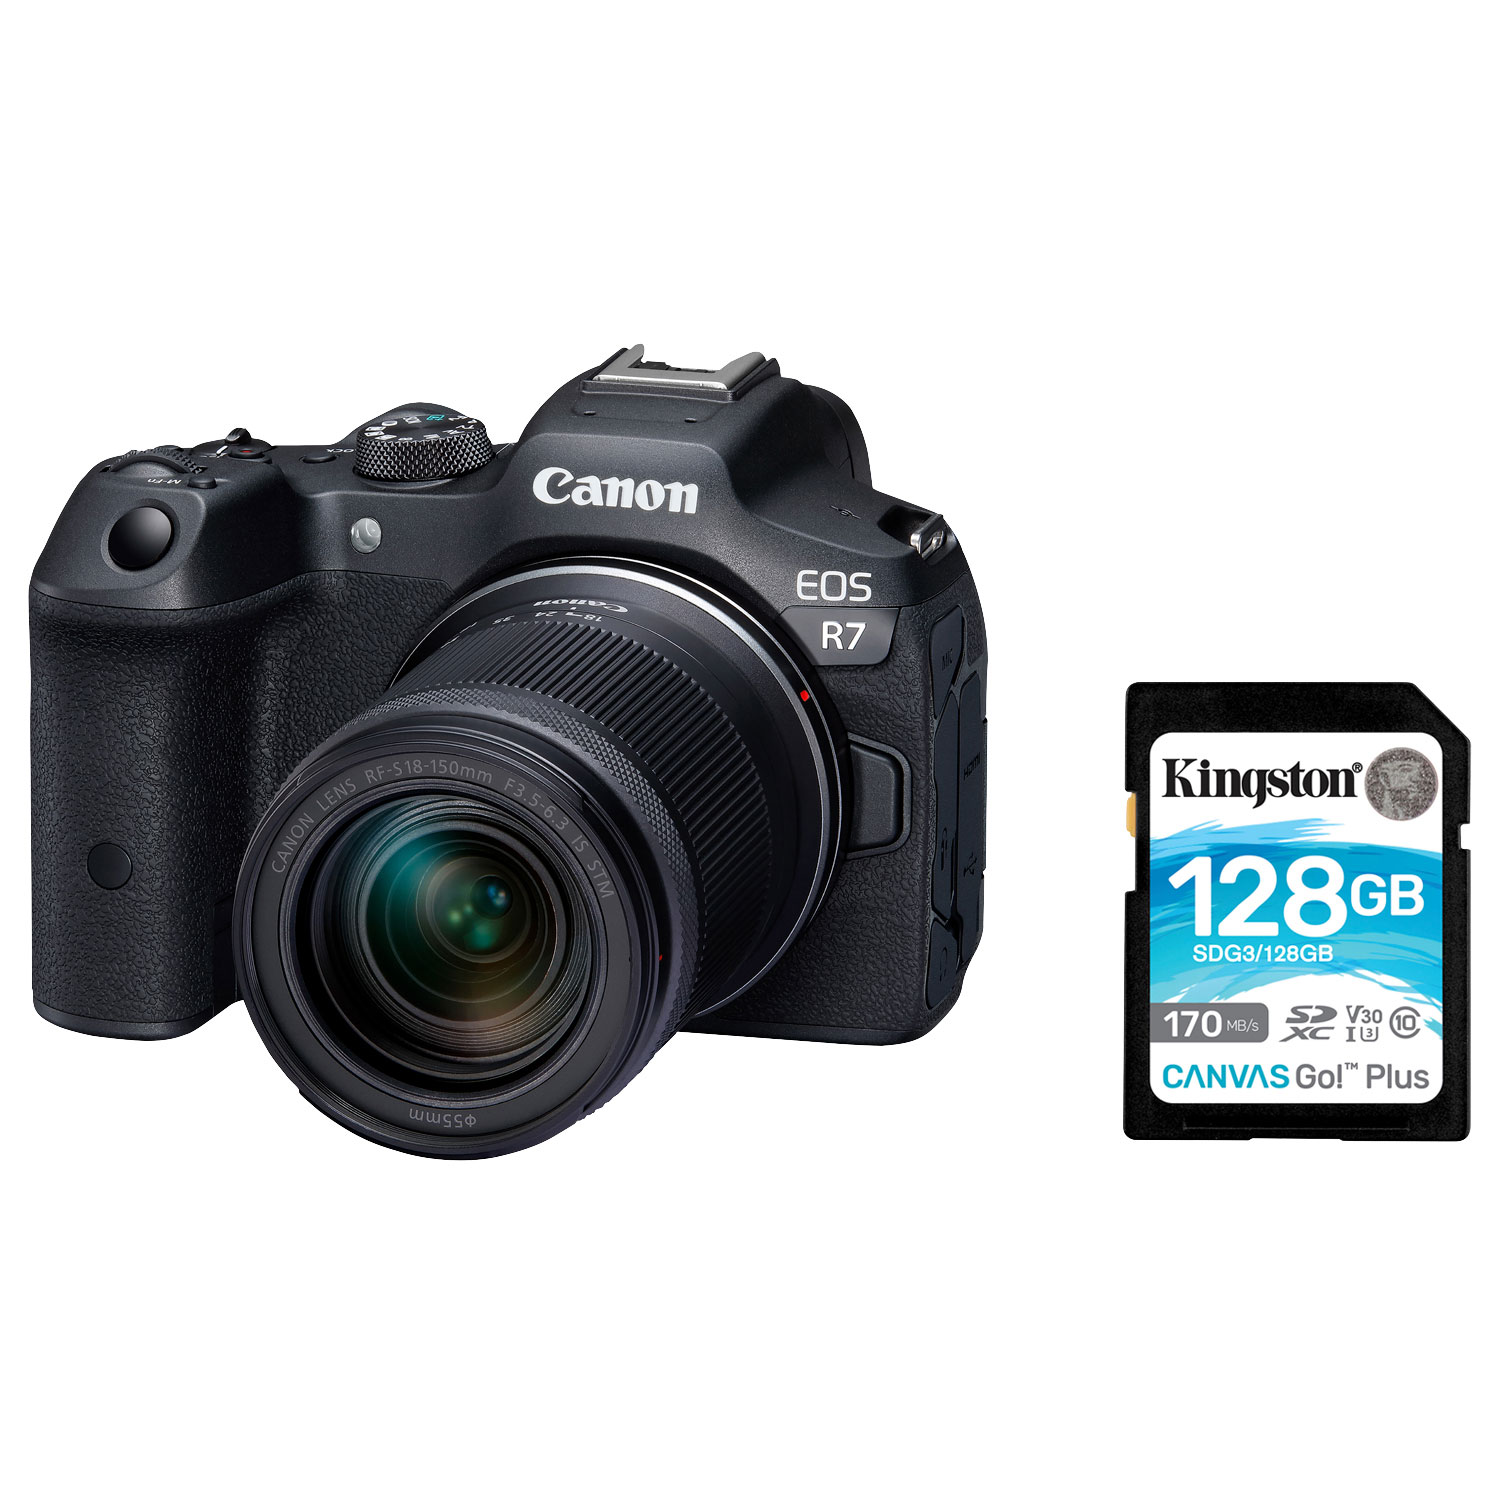 Canon EOS R7 Mirrorless Camera with 18-150mm STM Lens Kit & 128GB 170MB/s SDXC Memory Card